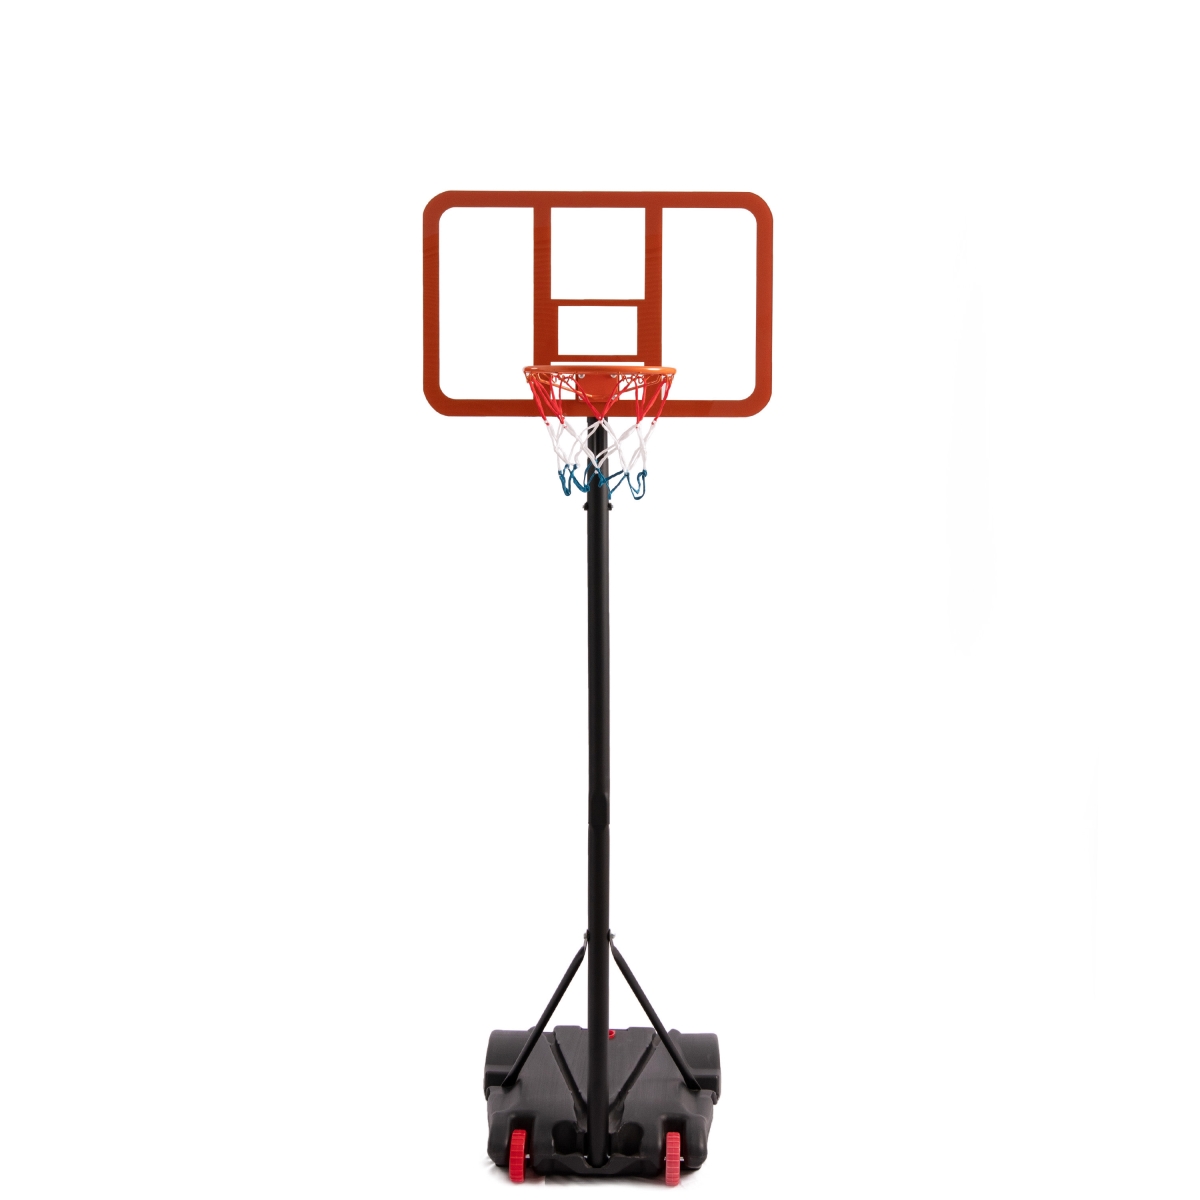 Olympian Athlete Top Shot Portable Basketball System